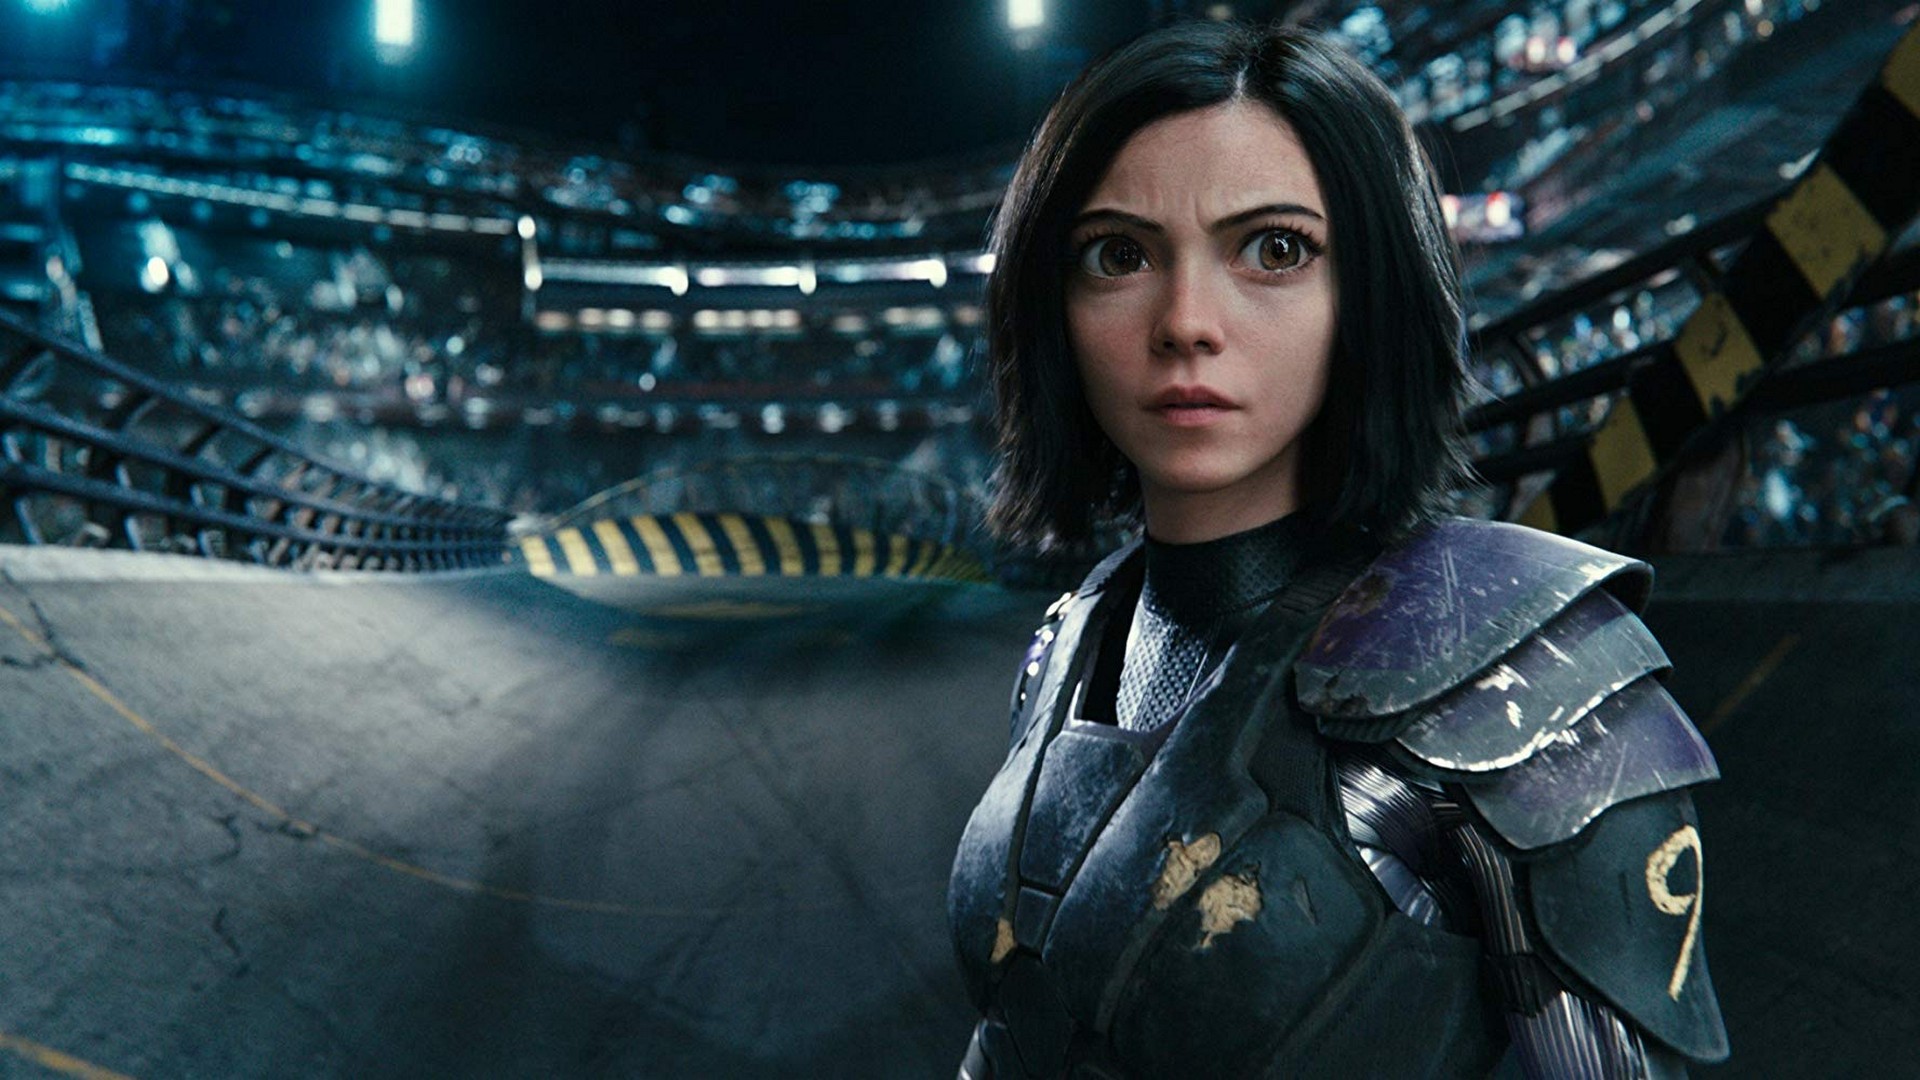 Alita Battle Angel Wallpaper HD with high-resolution 1920x1080 pixel. You can use this poster wallpaper for your Desktop Computers, Mac Screensavers, Windows Backgrounds, iPhone Wallpapers, Tablet or Android Lock screen and another Mobile device